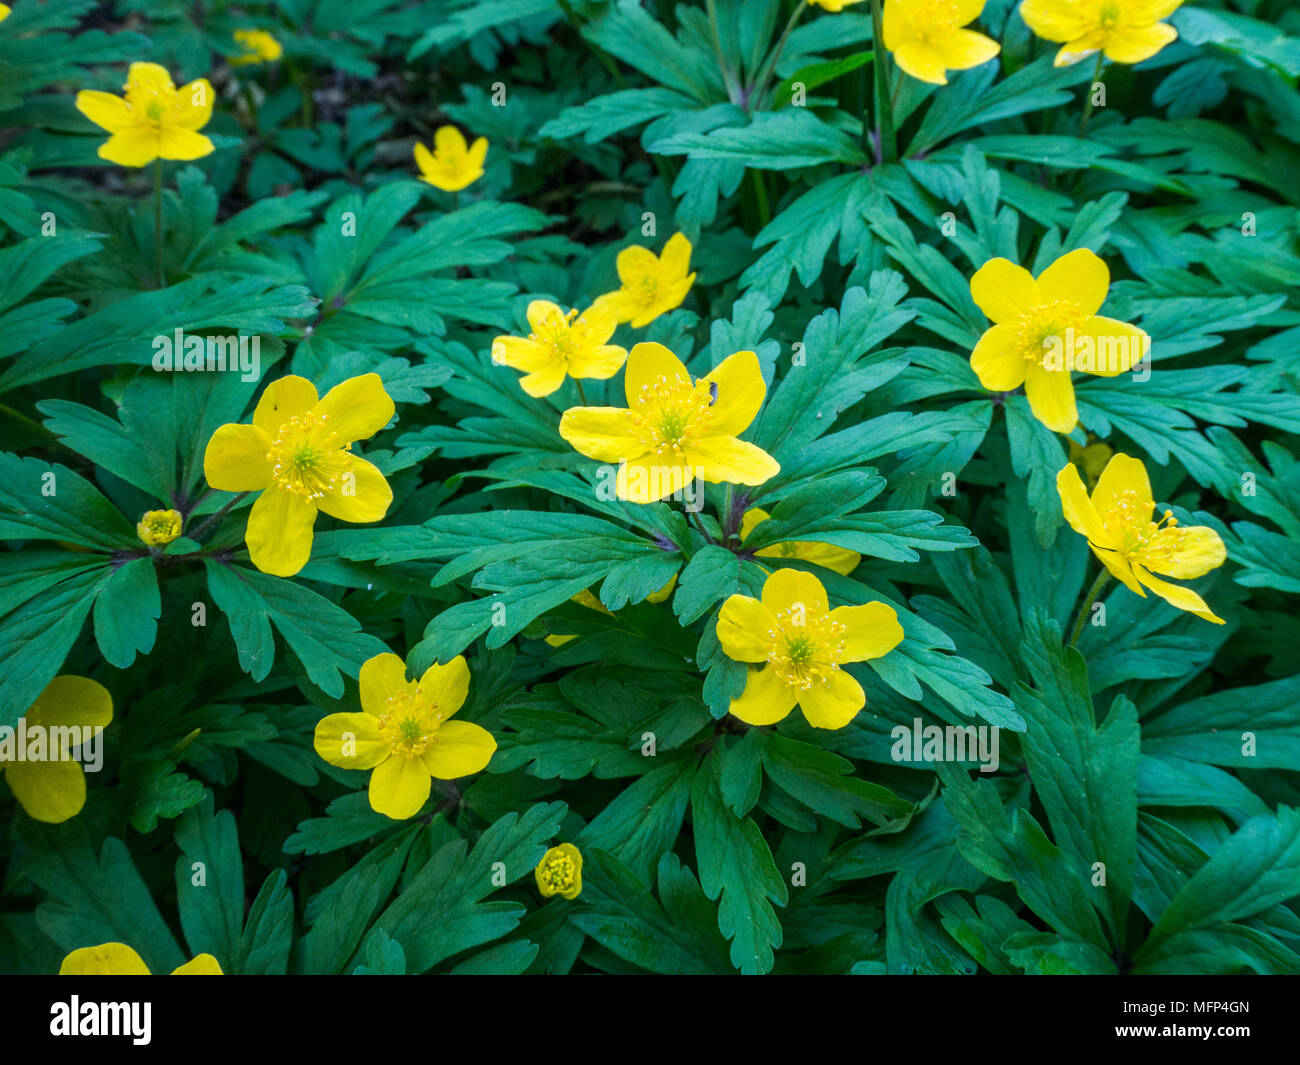 The bright yellow flowers of Anemone ranunculoides against a background of its deeply dissected foliage Stock Photo